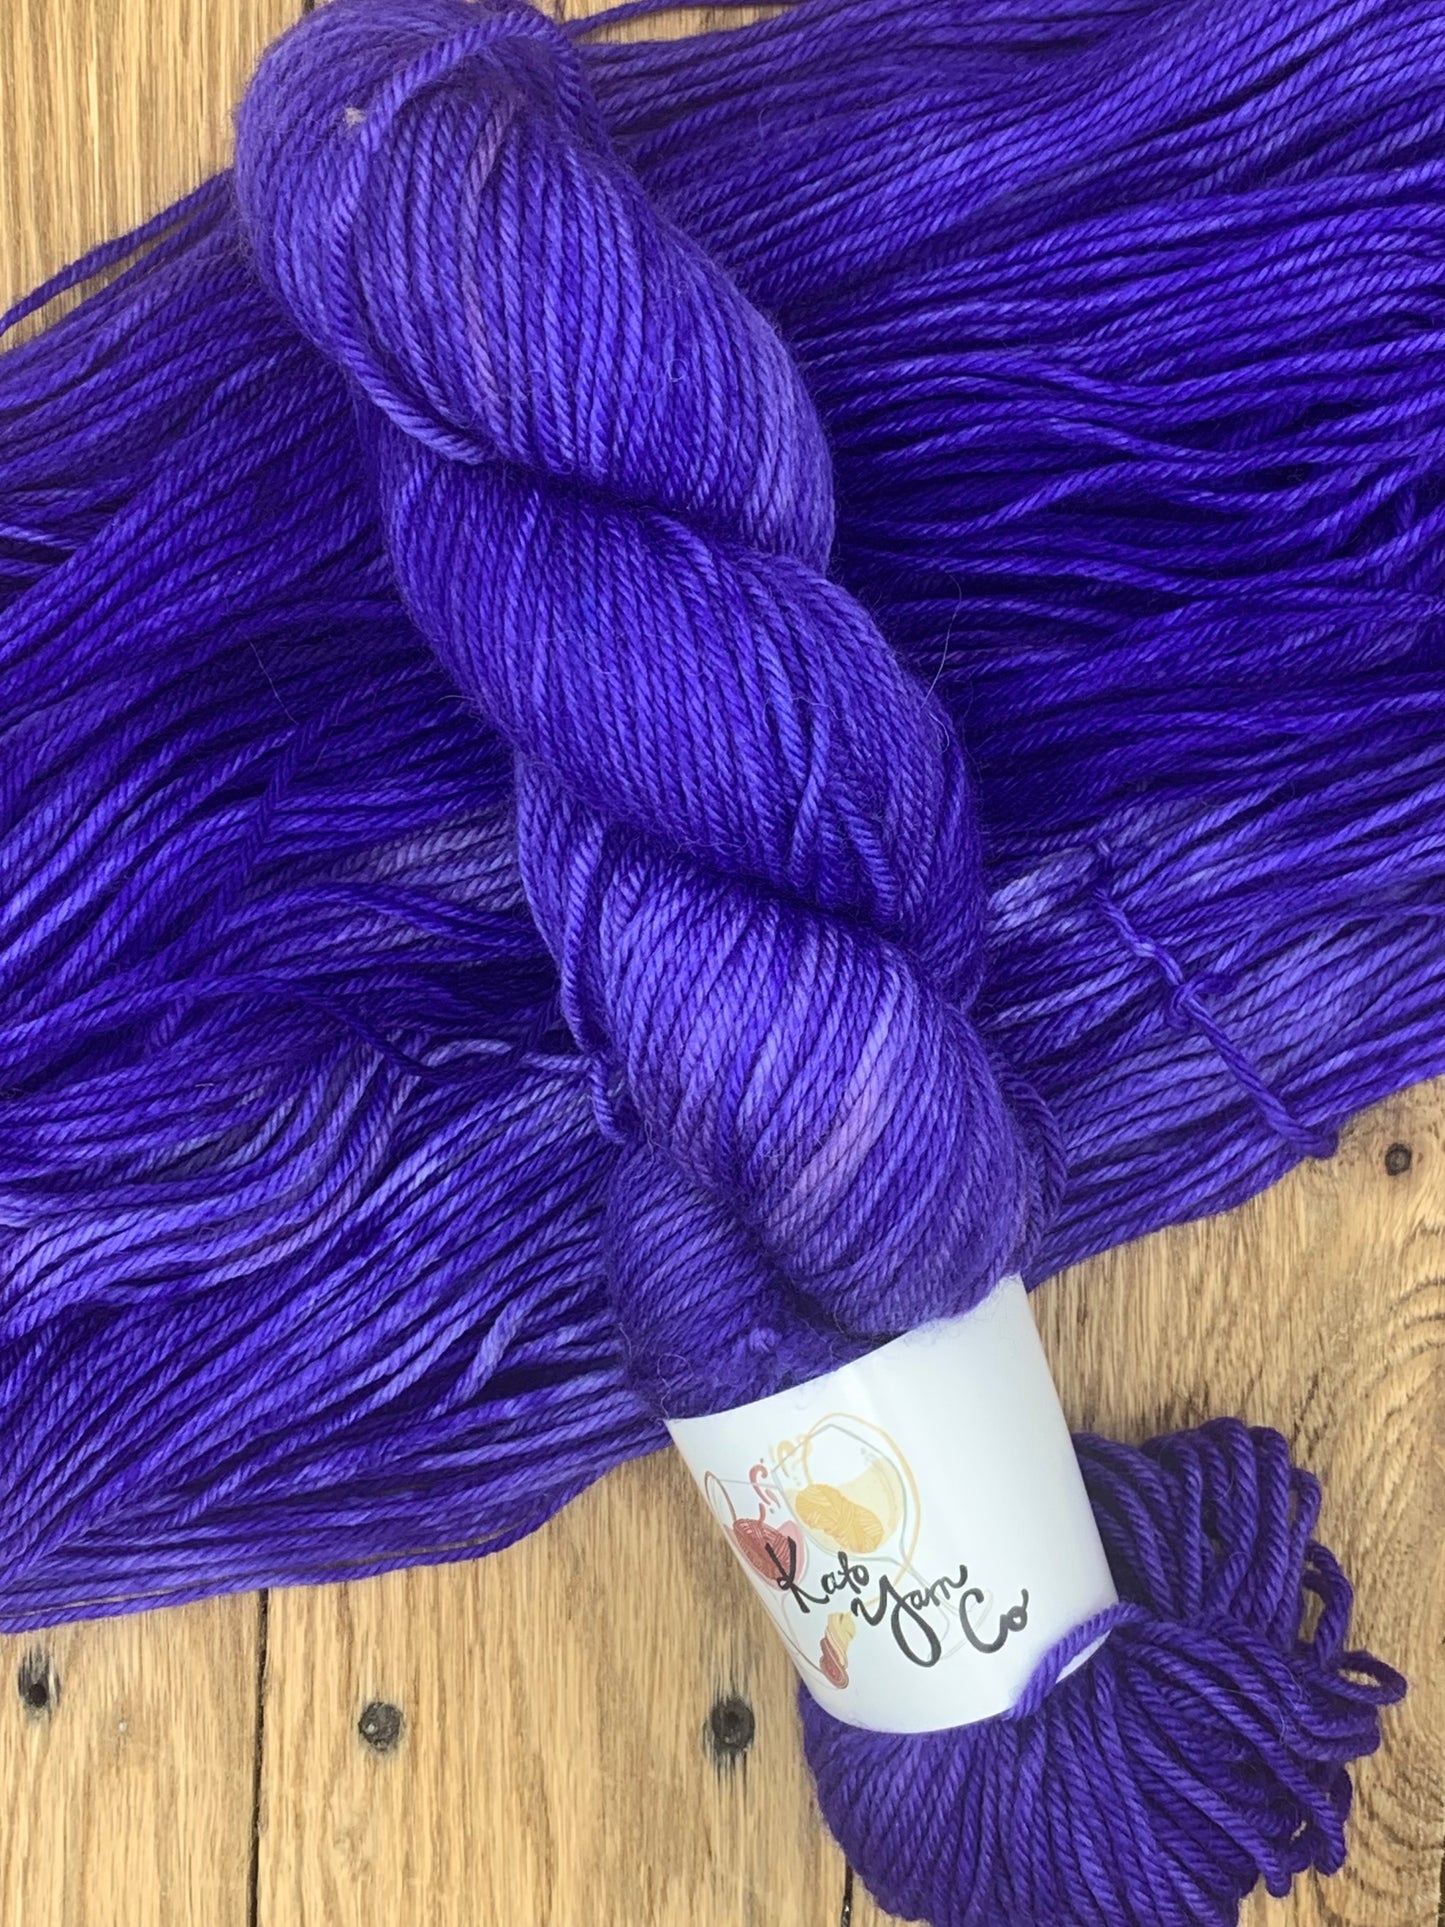 Hot! Dish Periwinkle - Non SW Worsted